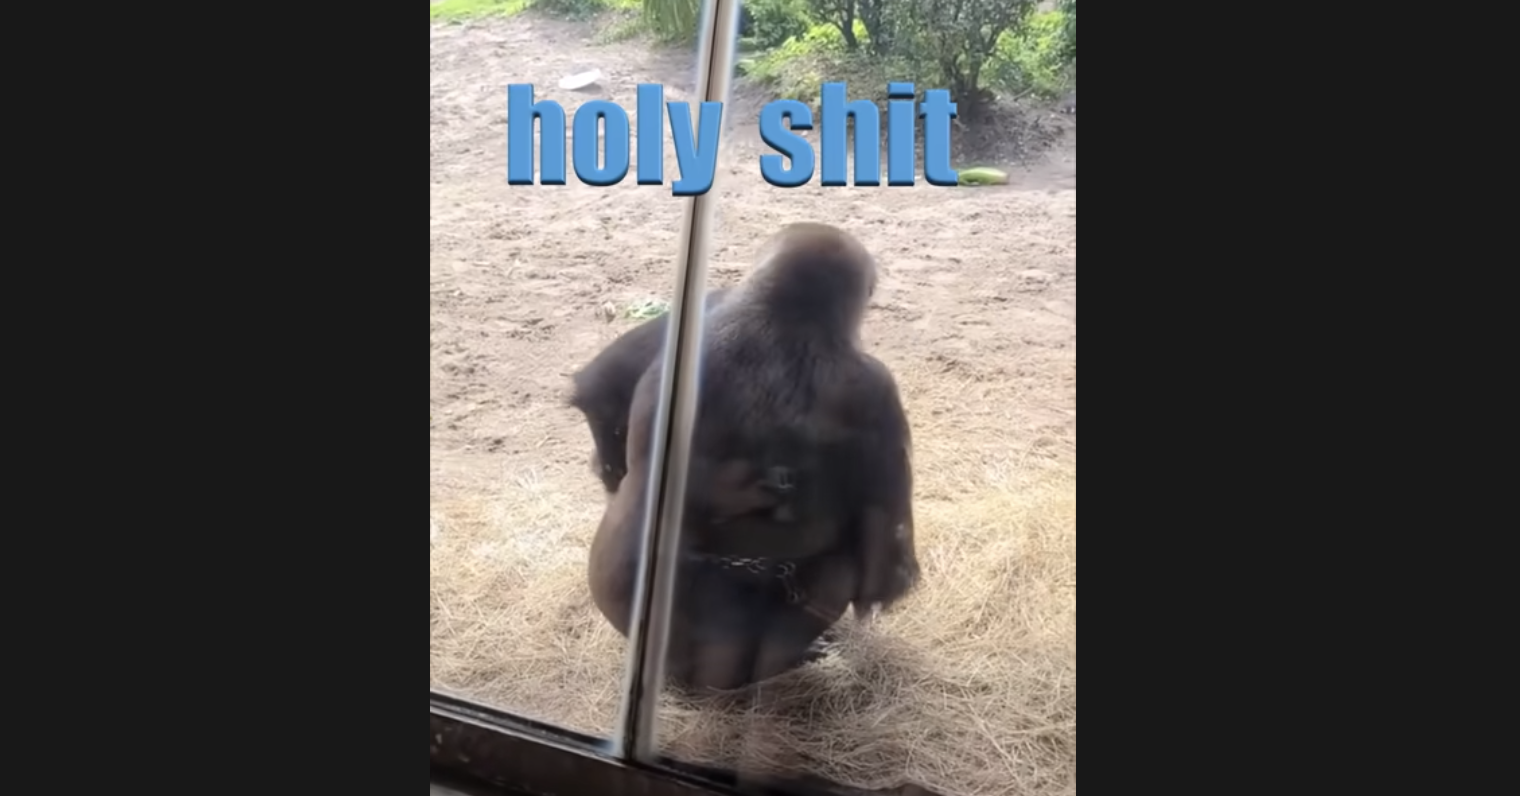 An ape with the headline "holy shit"